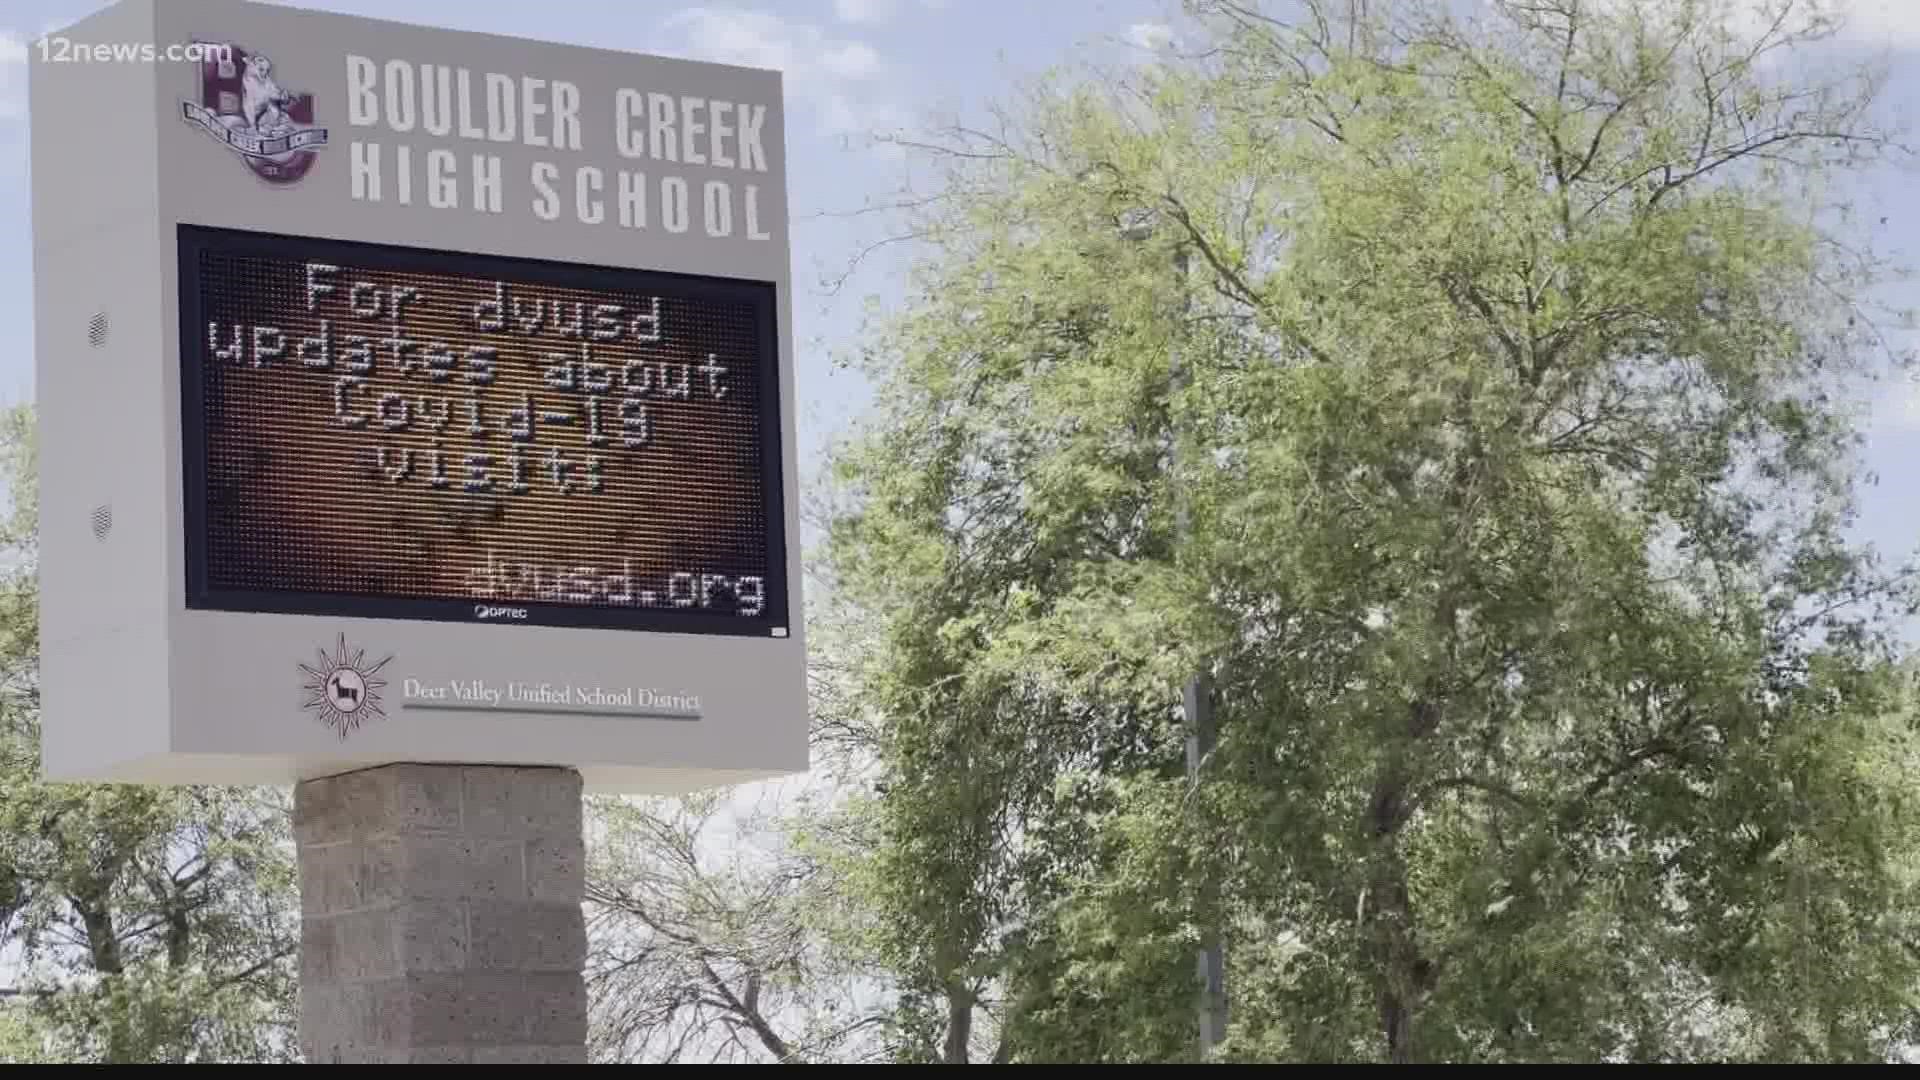 Valley parents raise questions about the preparedness of Boulder Creek HS after a bomb threat caused evacuations of the school.